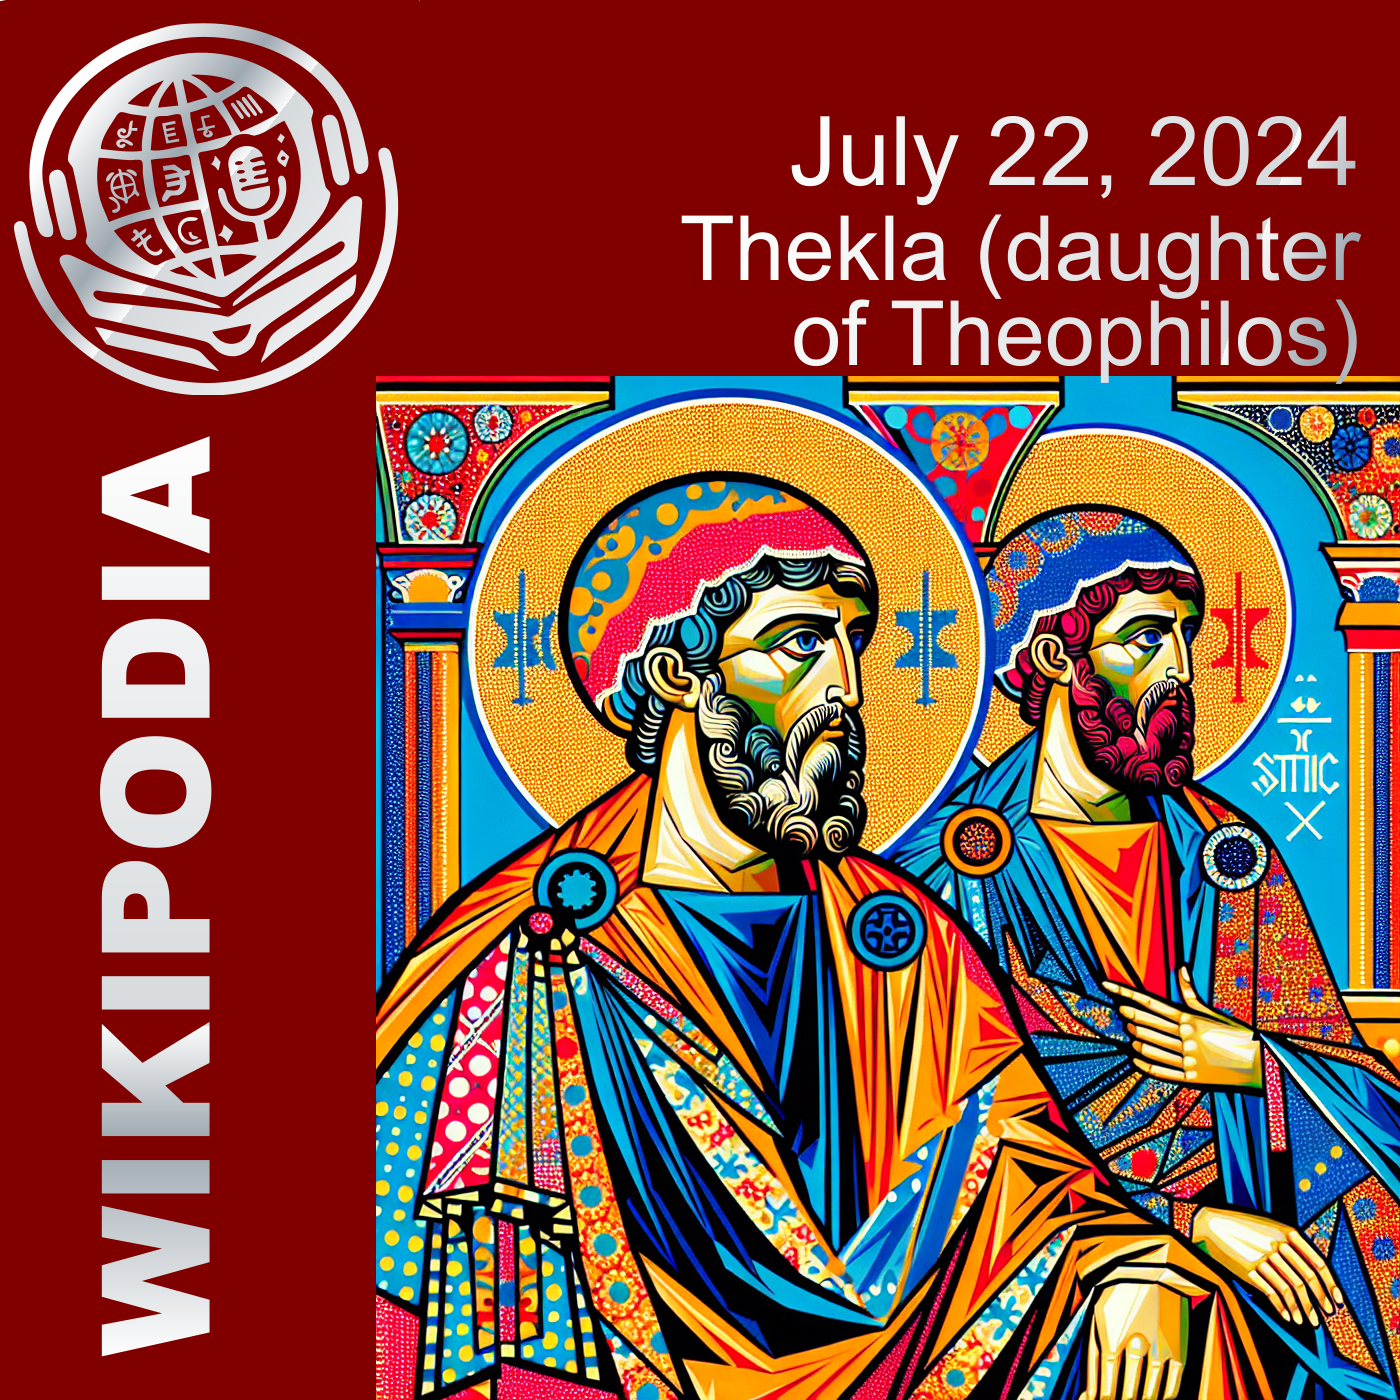 Thekla (daughter of Theophilos)